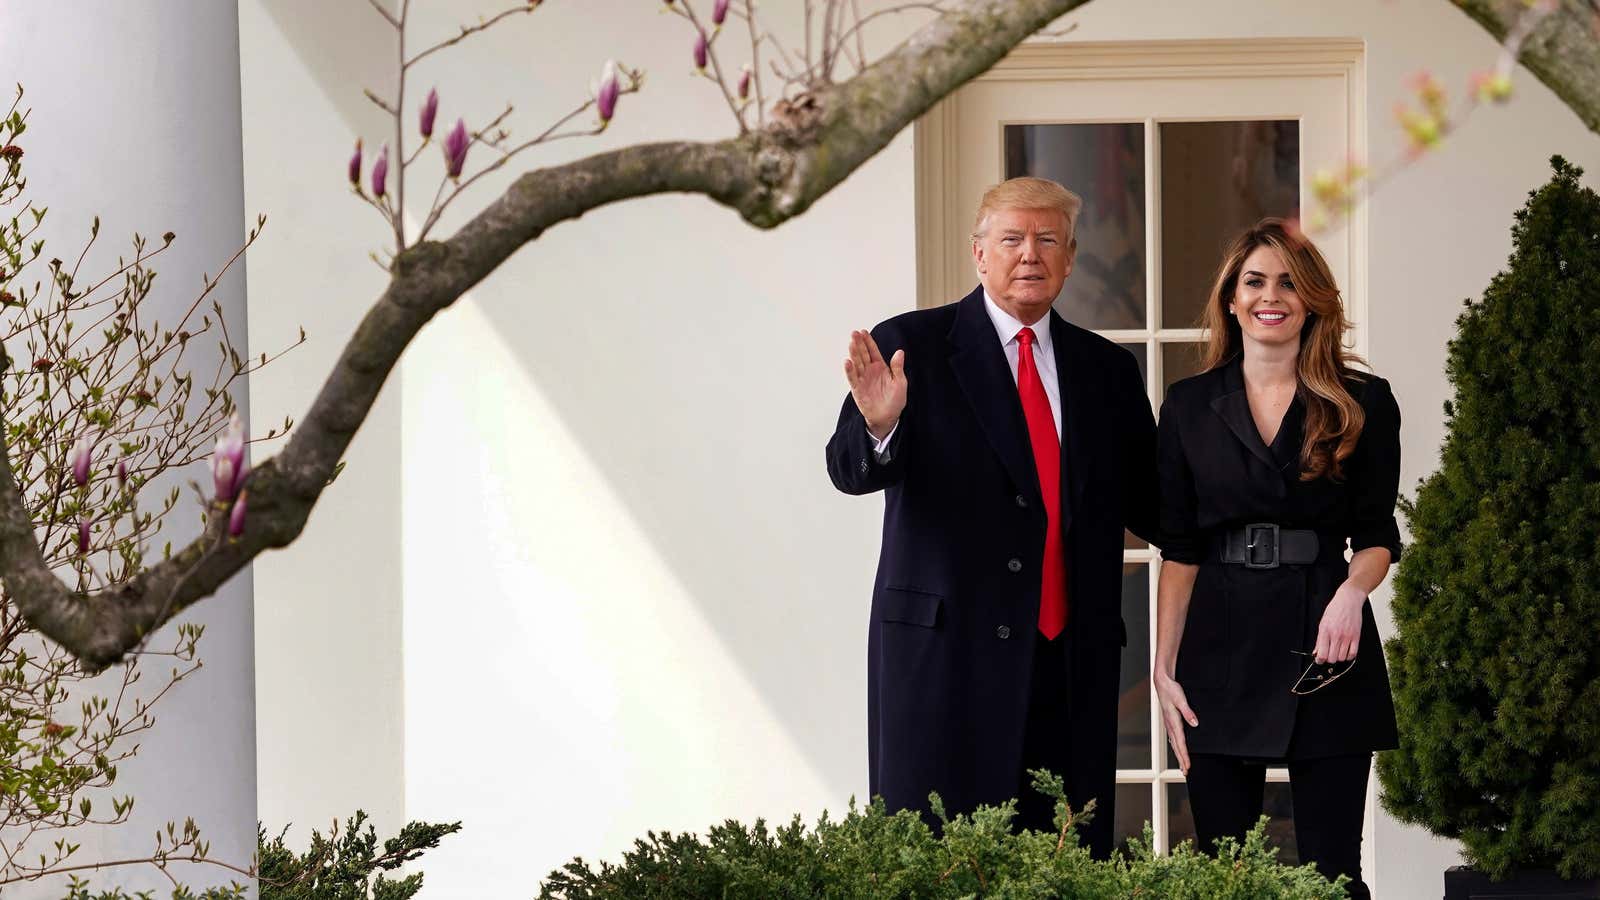 President Donald Trump waves with outgoing White House Communications Director Hope Hicks